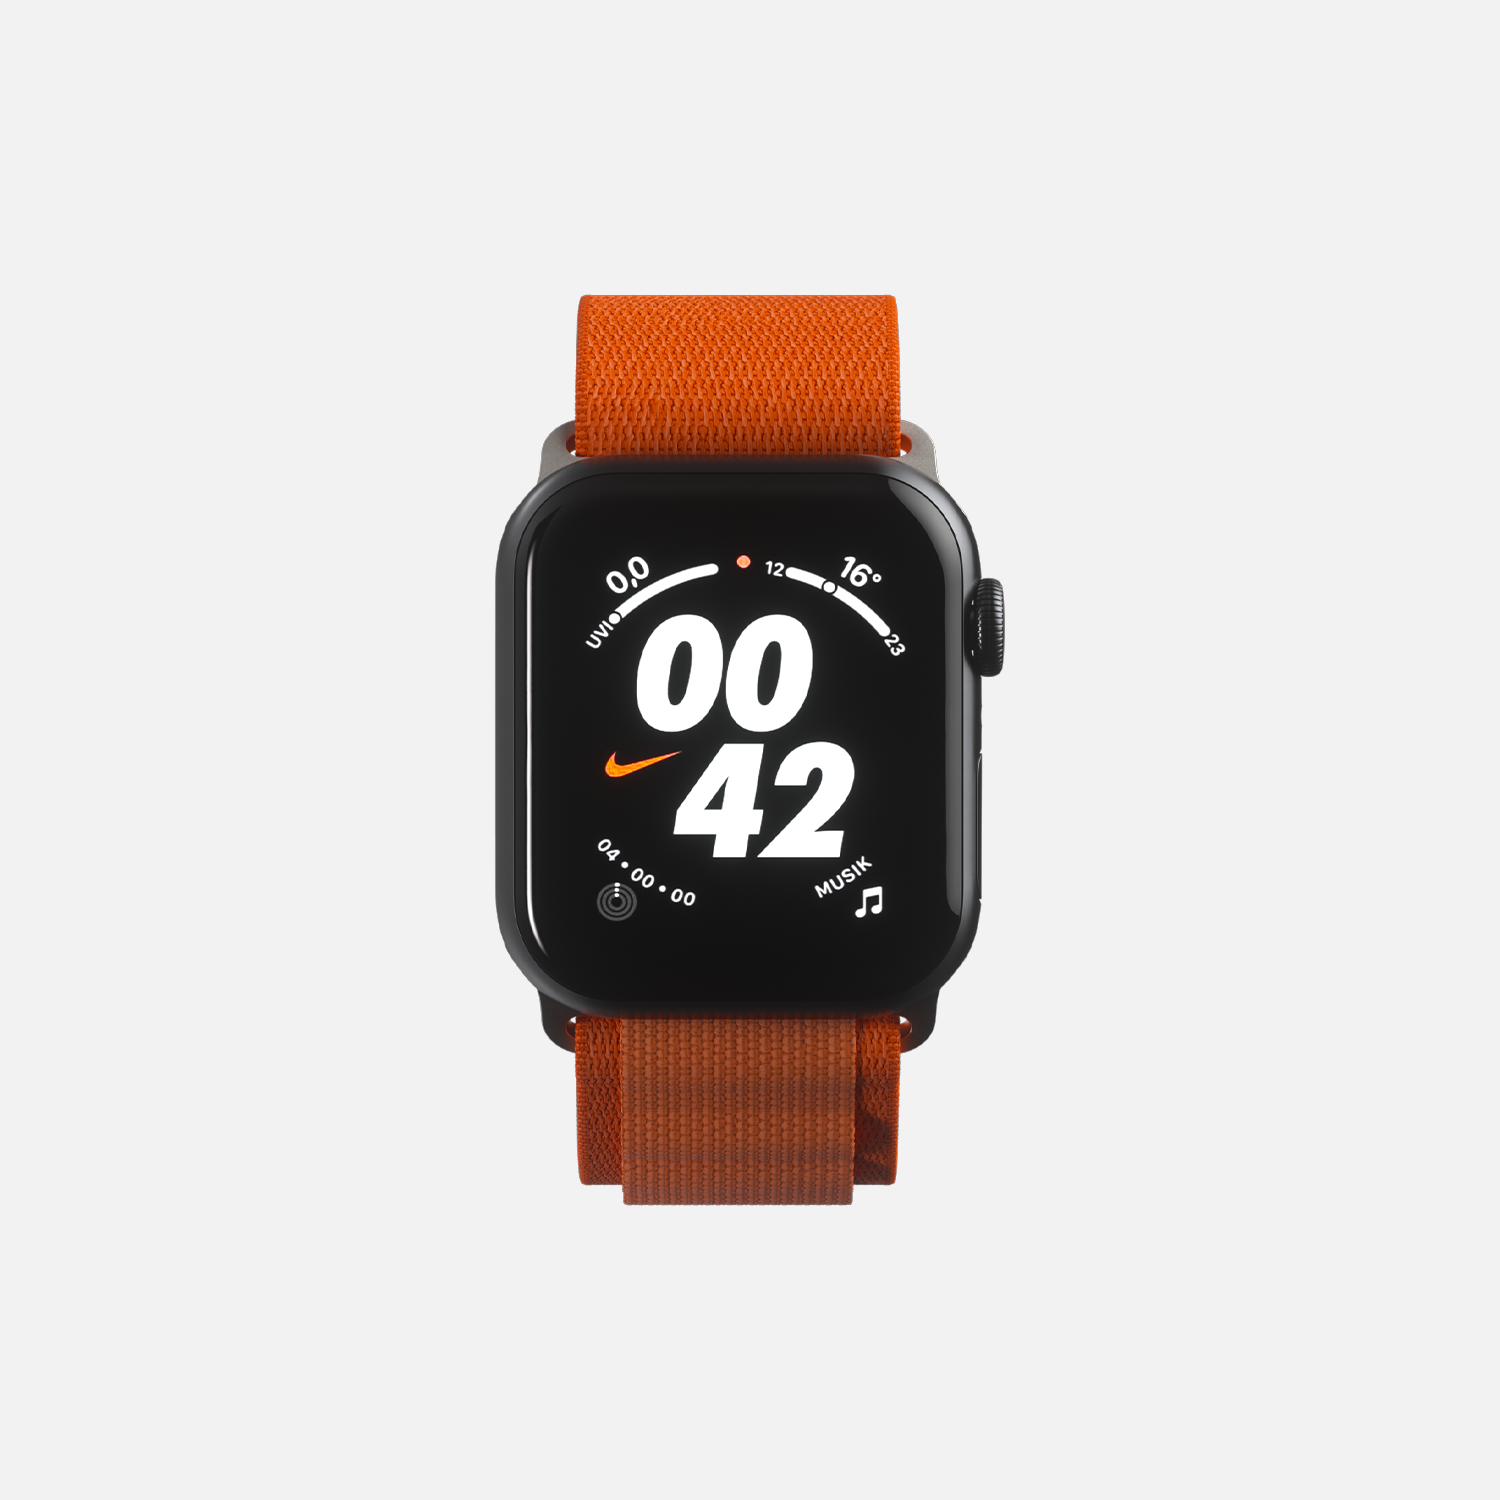 Black smartwatch with orange strap, displaying Nike logo on screen, isolated on white.